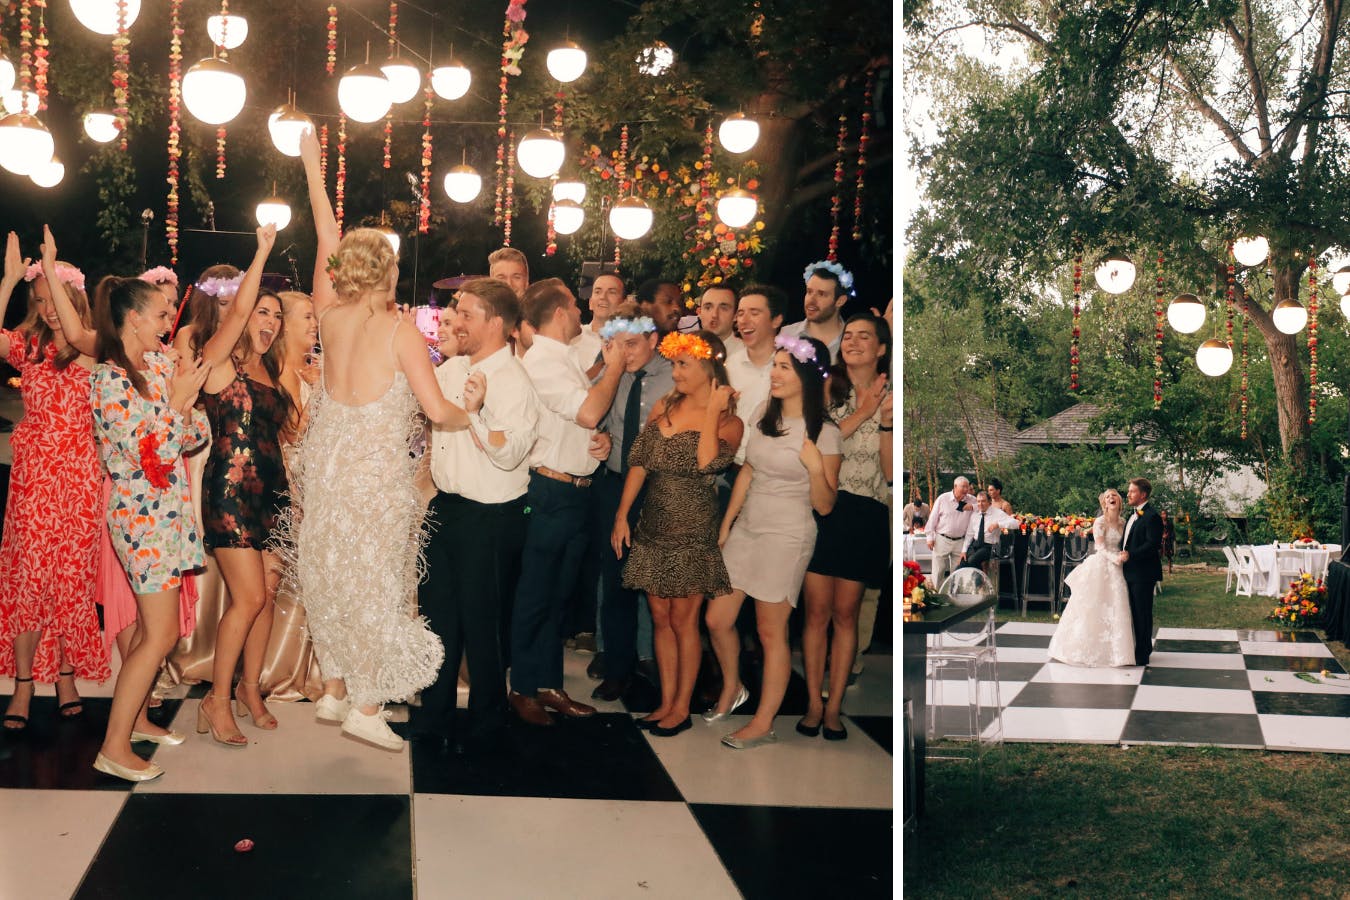 Modern outdoor wedding with globed lighting in treetops | PartySlate